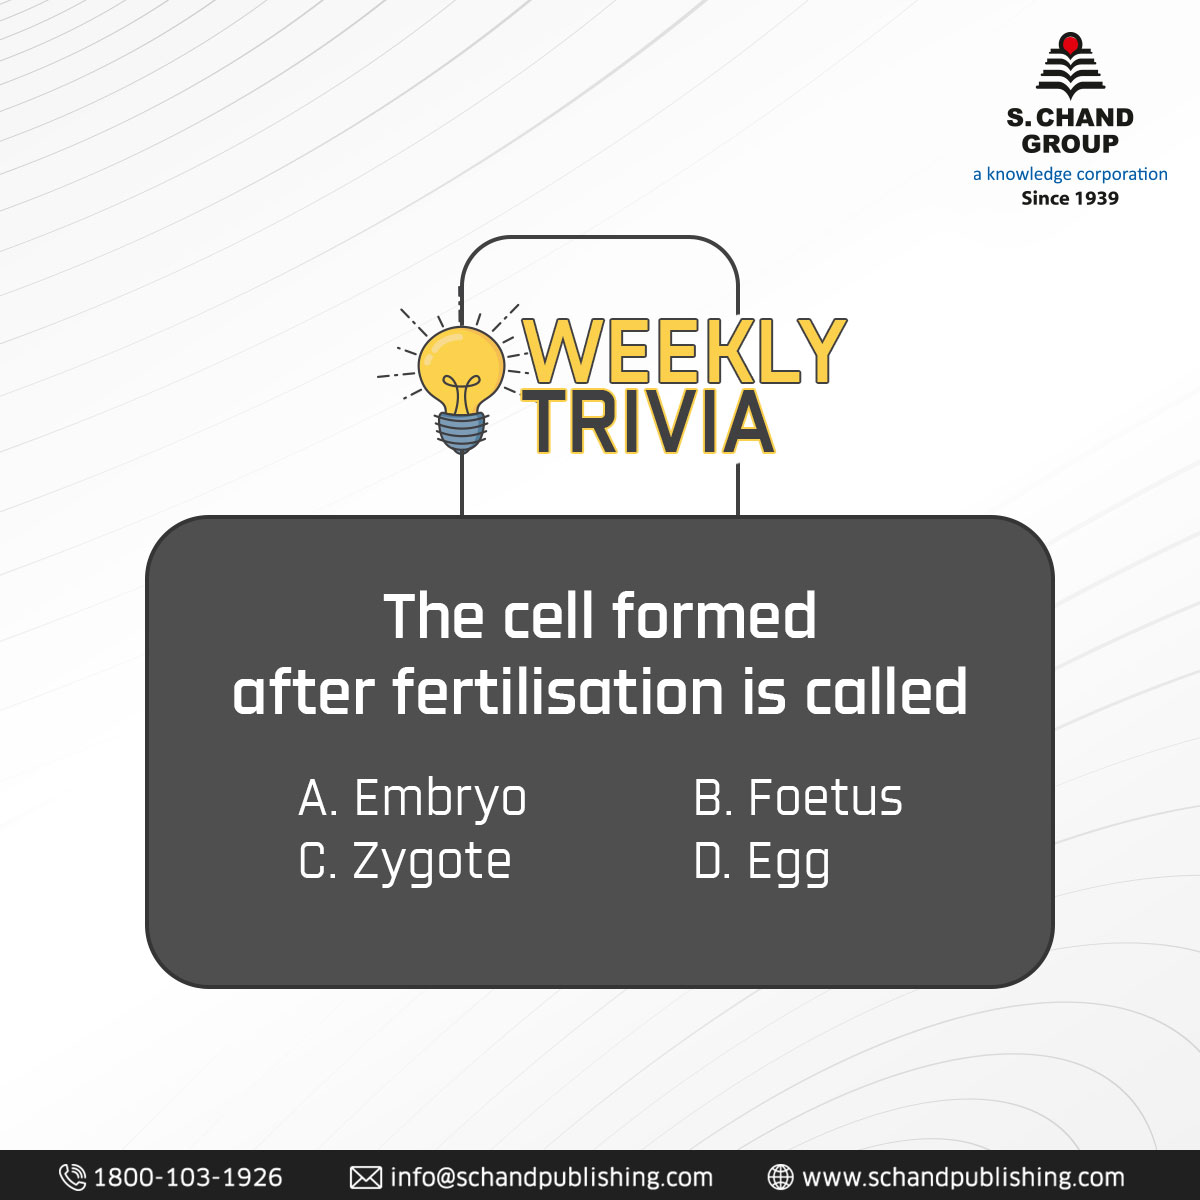 Drop your answers below and let's see who's the trivia champion this week!  Don't forget to tag a friend to challenge them too! 

#SChand #QuizTime #ScienceQuiz #WeeklyTrivia #BrainTeasers #TestYourKnowledge